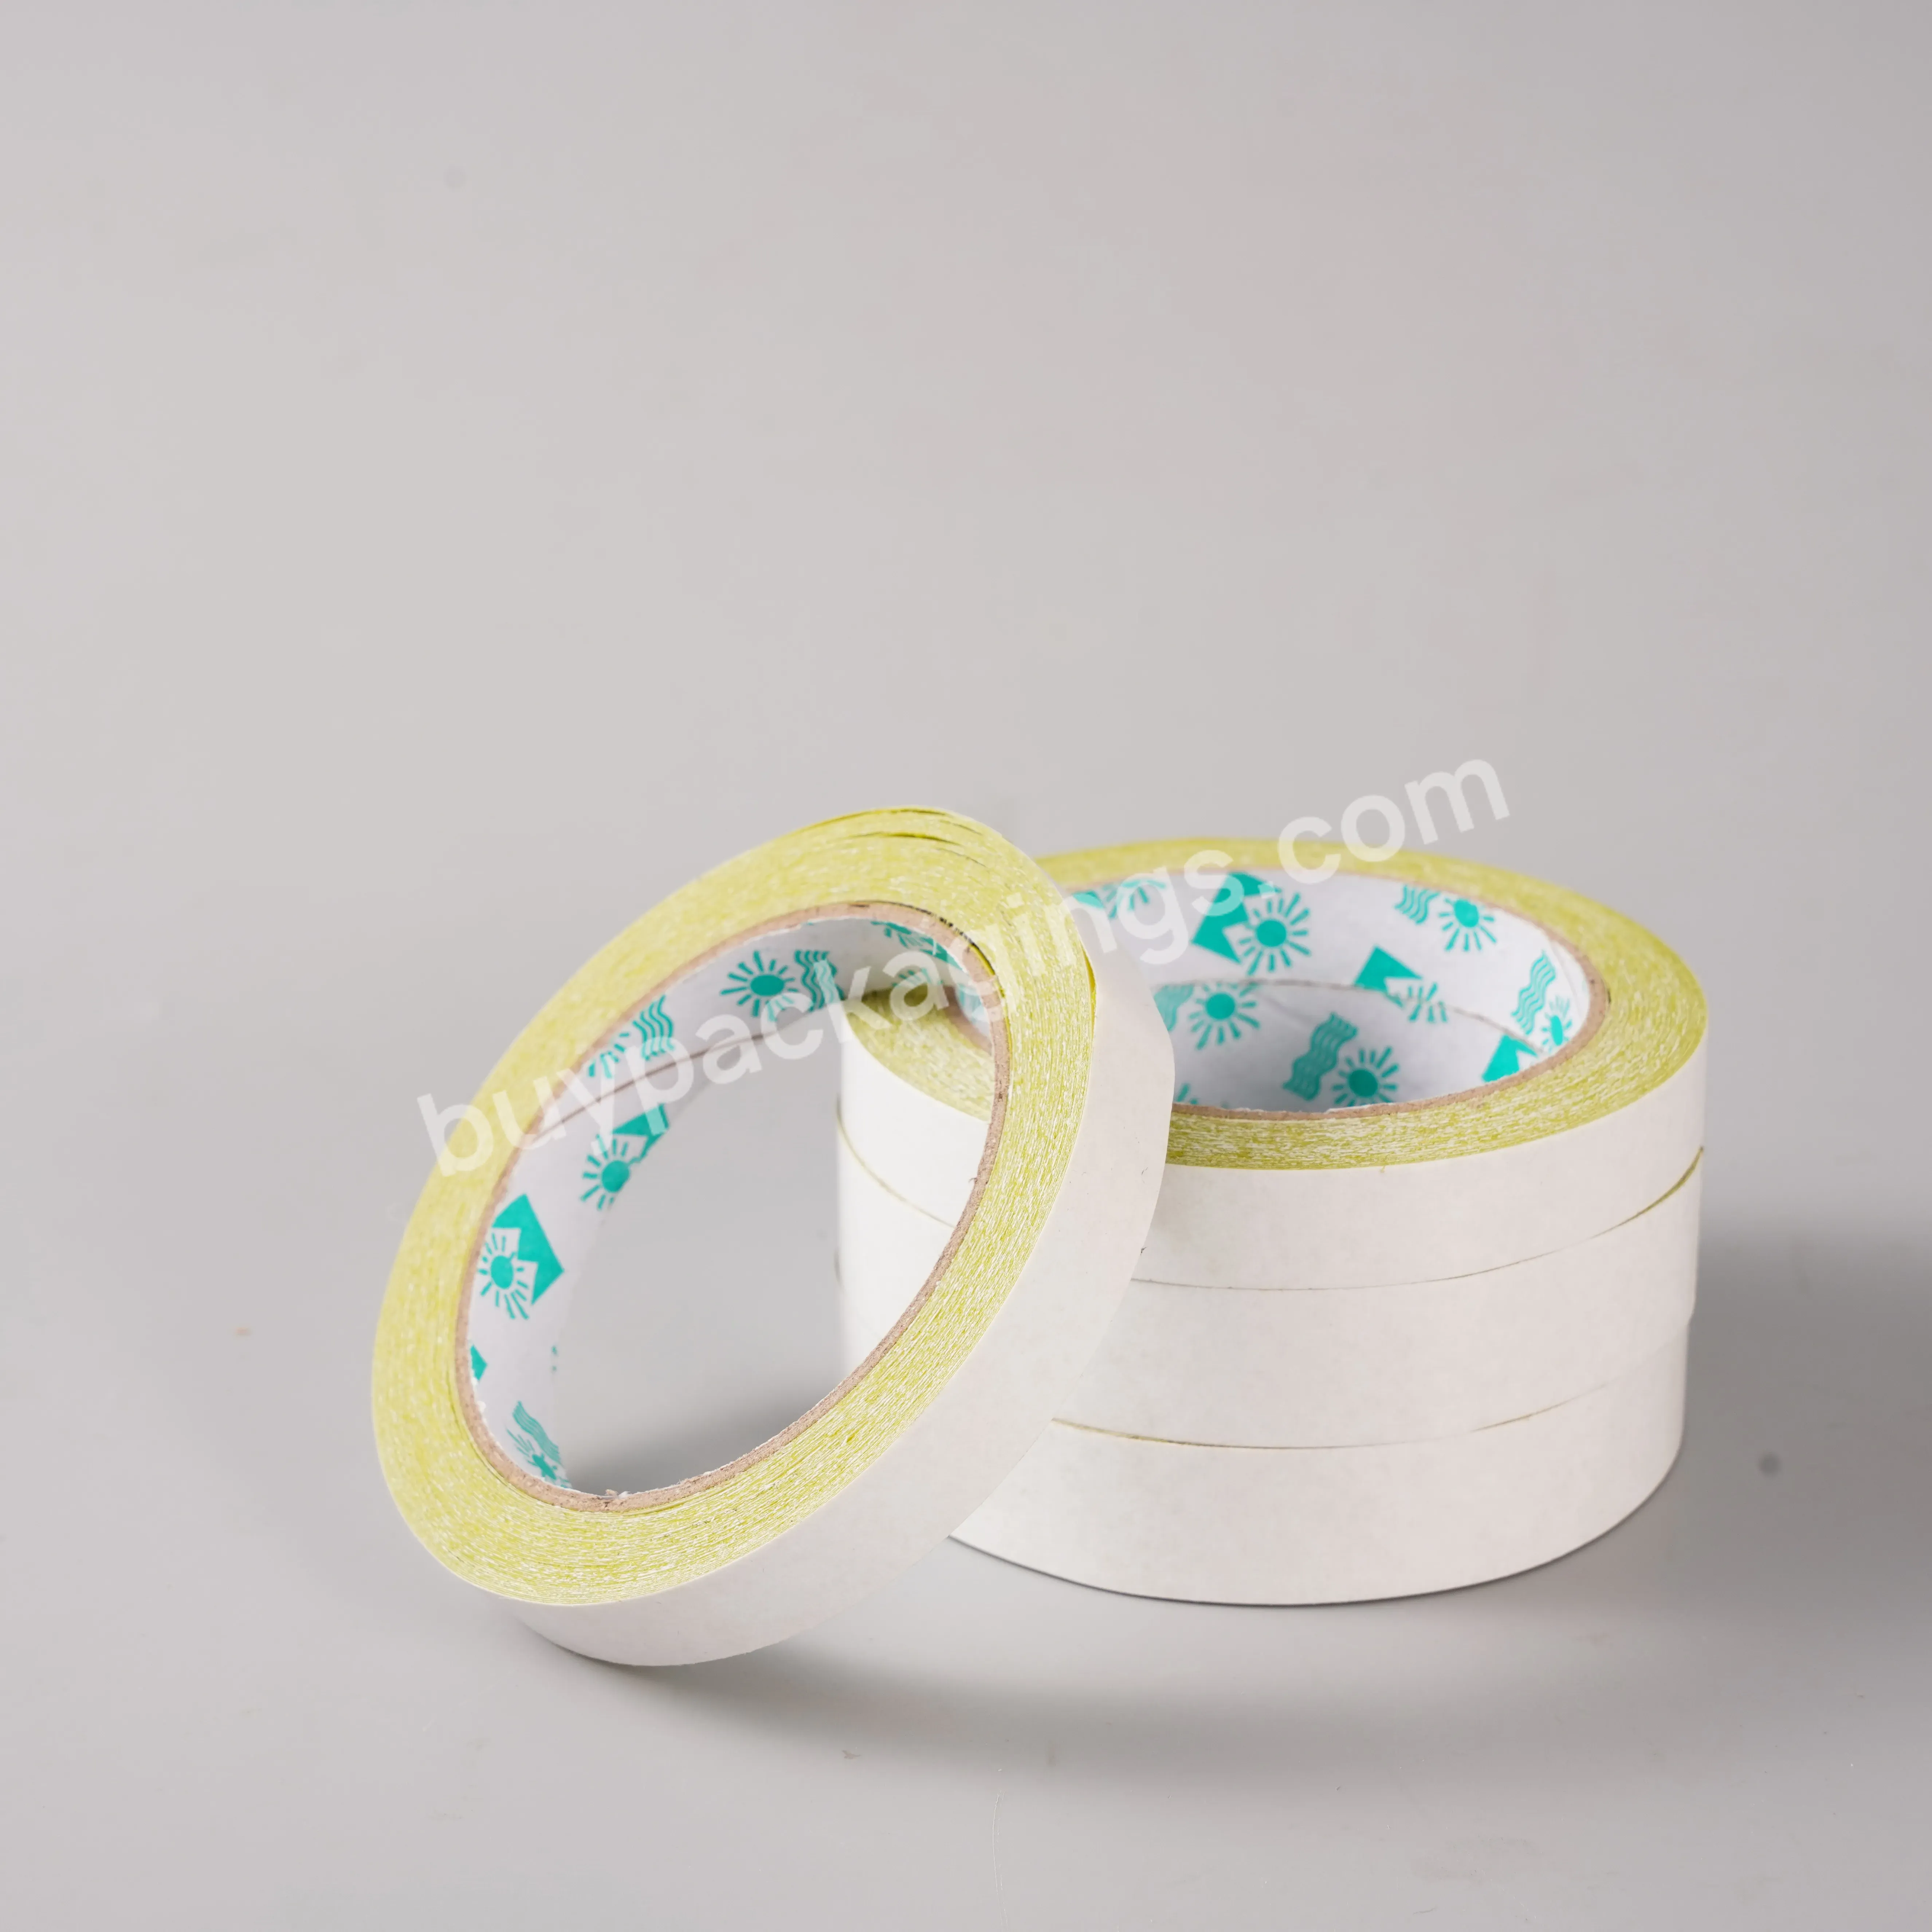 Hot Selling 20mm And 40mm Width Yellow Double-sided Tape For Attaching Goods